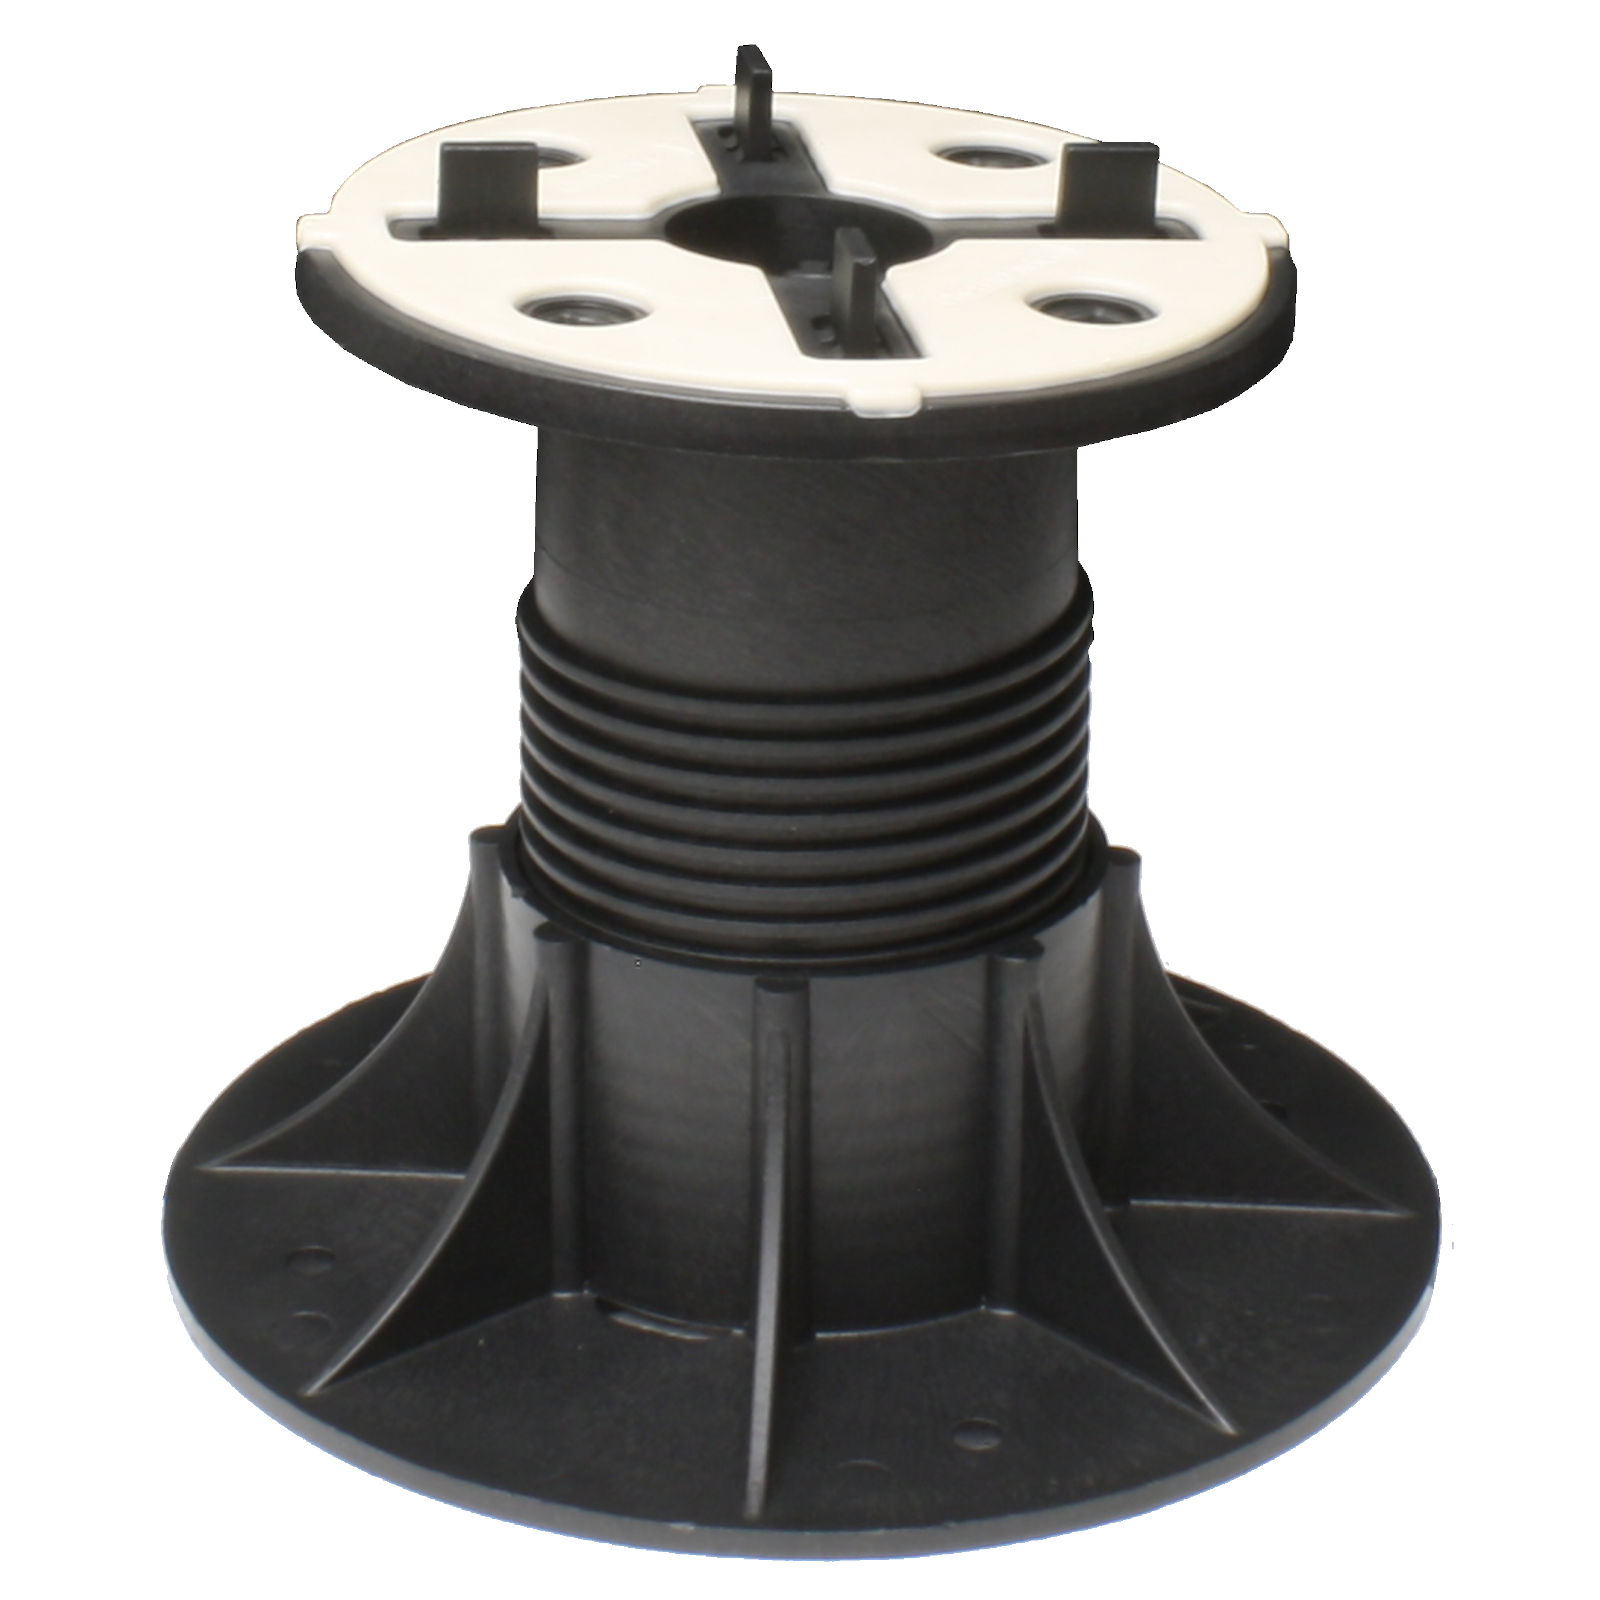 SE4 Adjustable Ped Support w/ Three-in-One Self Leveling Head 4.75” ‐ 6.75” (120‐170Mm)